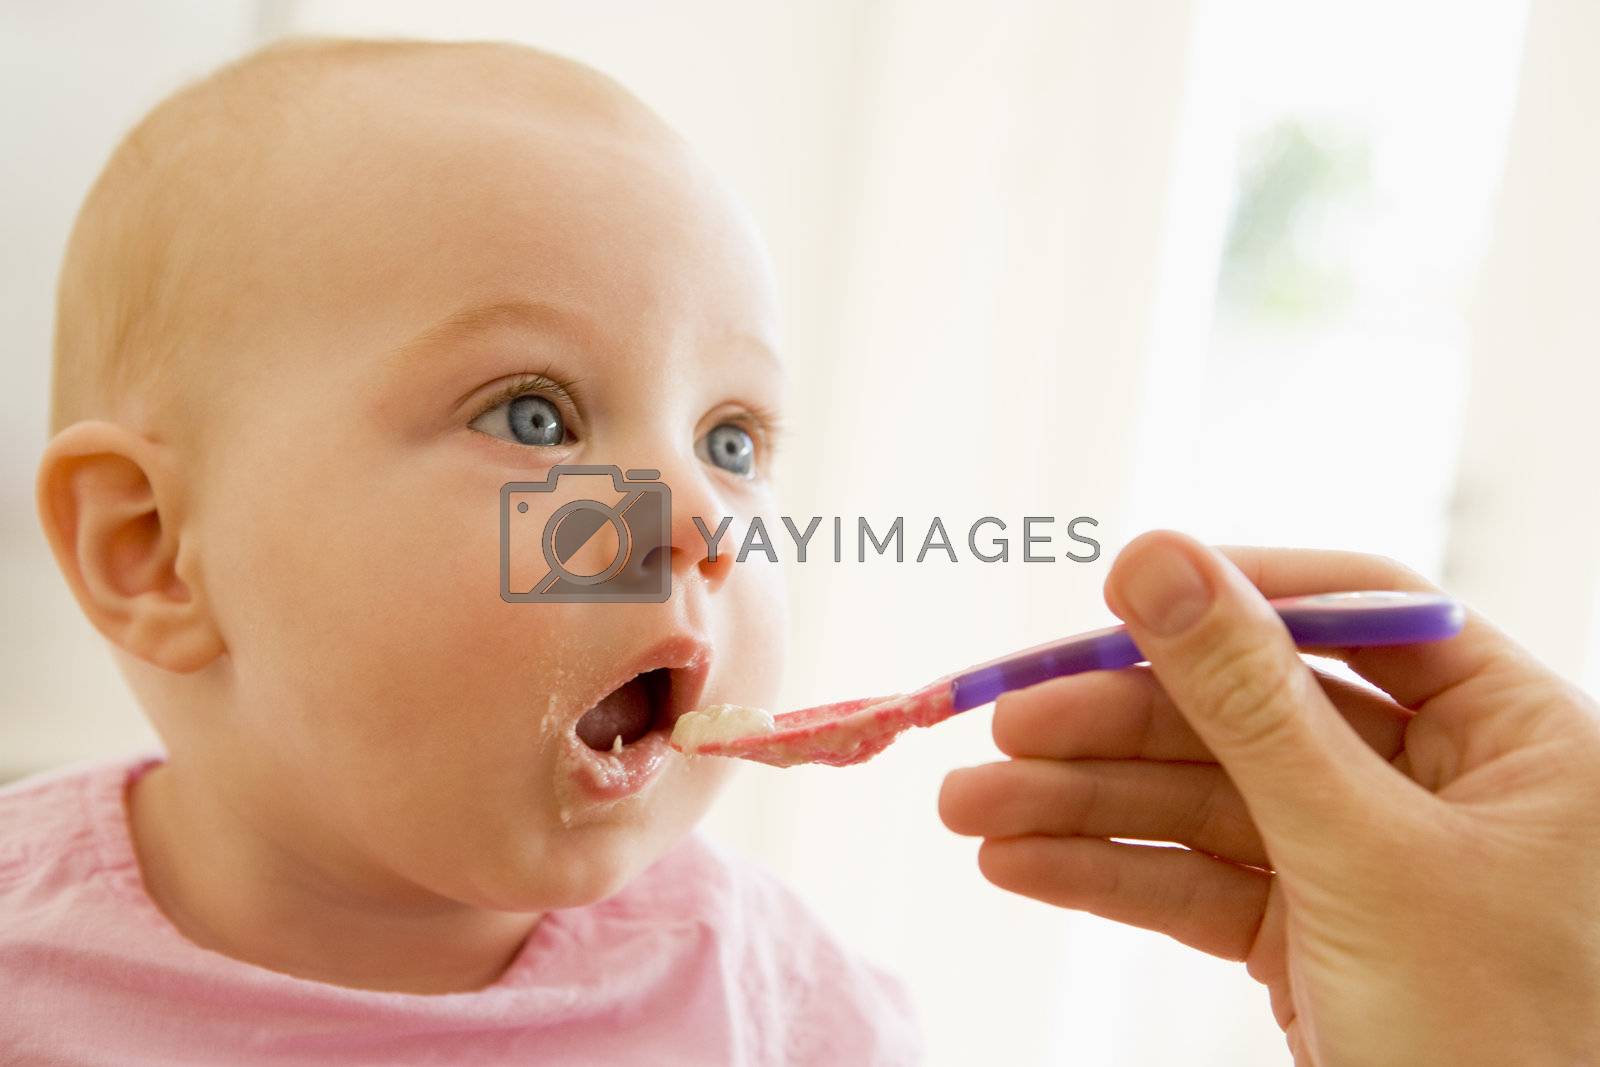 Royalty free image of Mother feeding baby food to baby by MonkeyBusiness